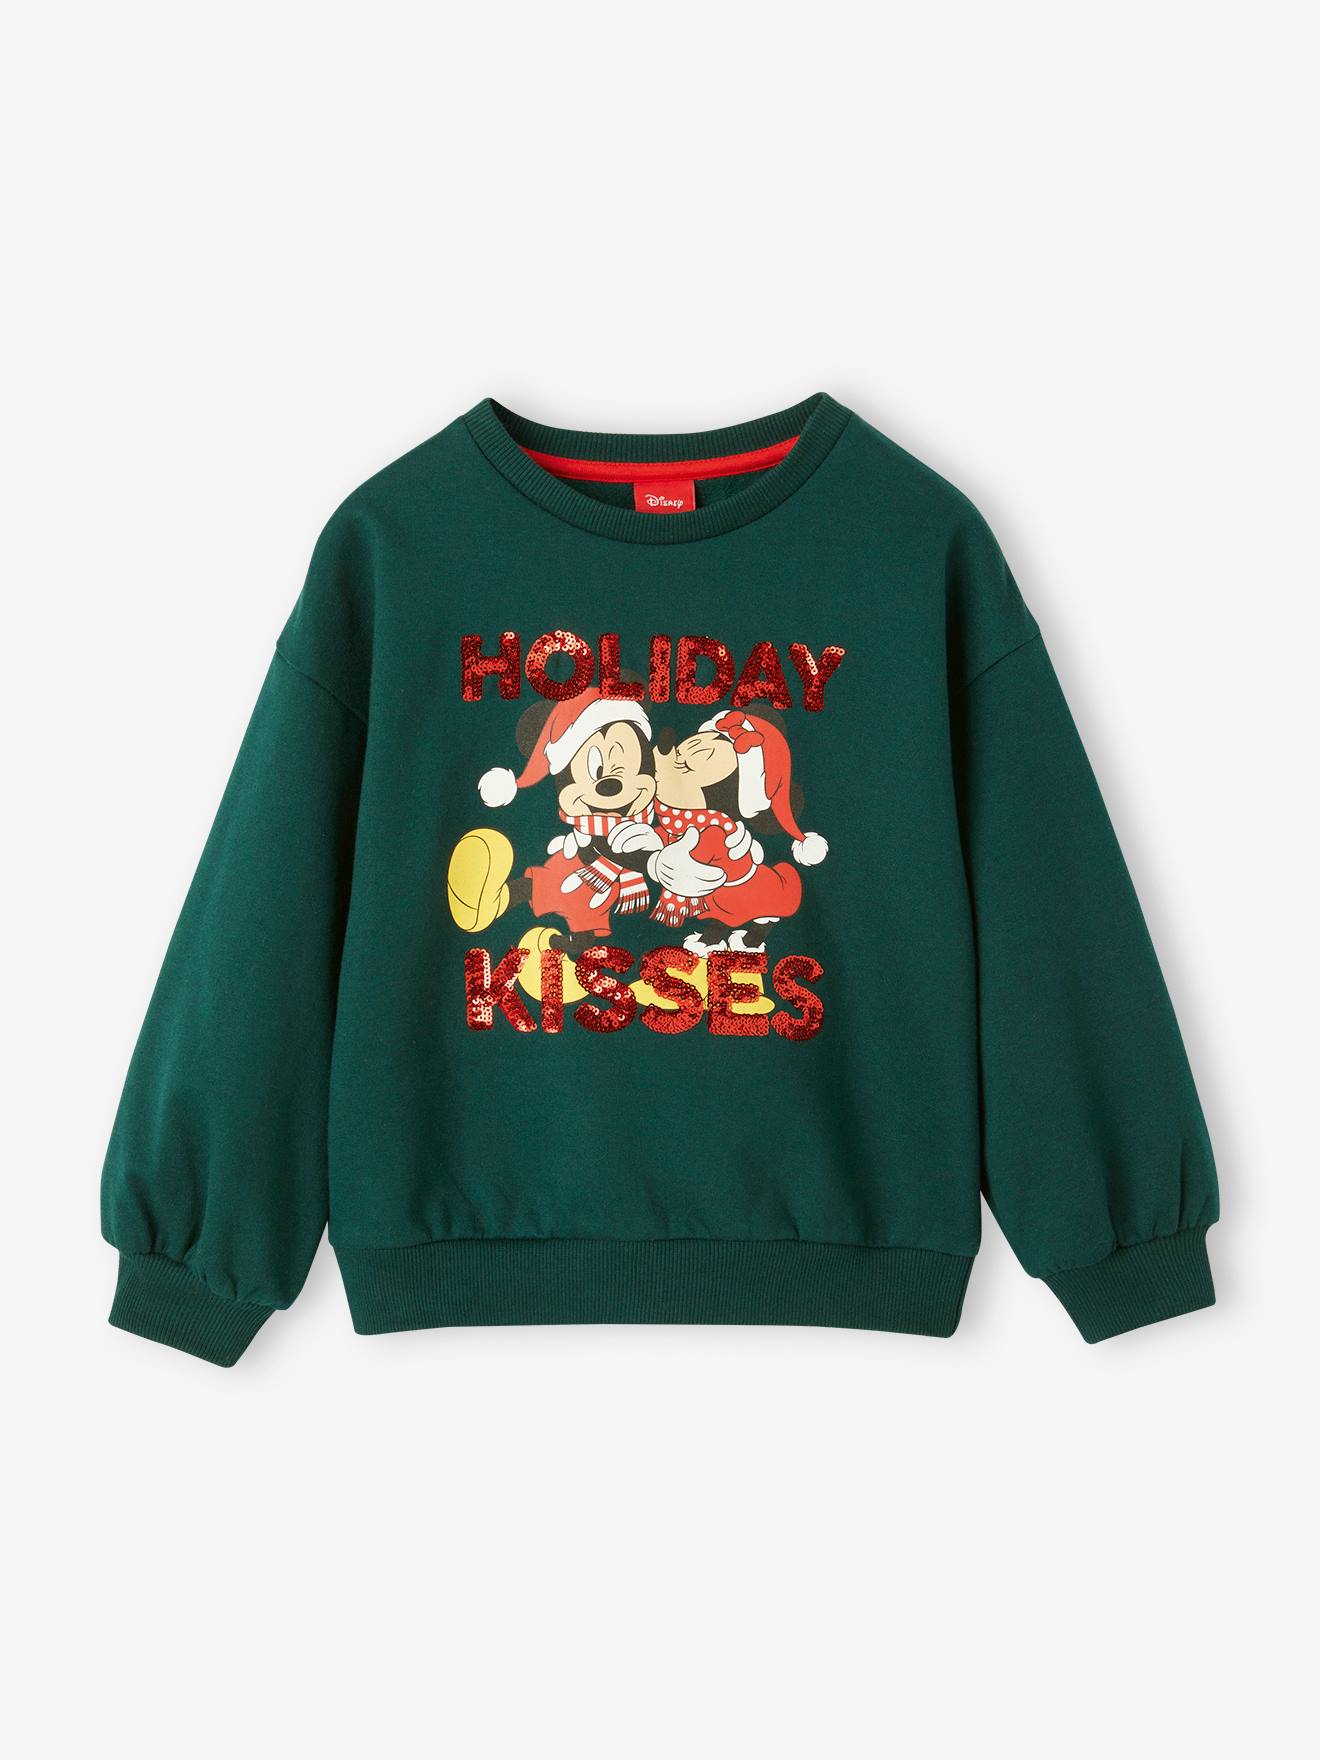 Christmas Special Mickey & Minnie Mouse(r) Sweatshirt by Disney for Girls fir green